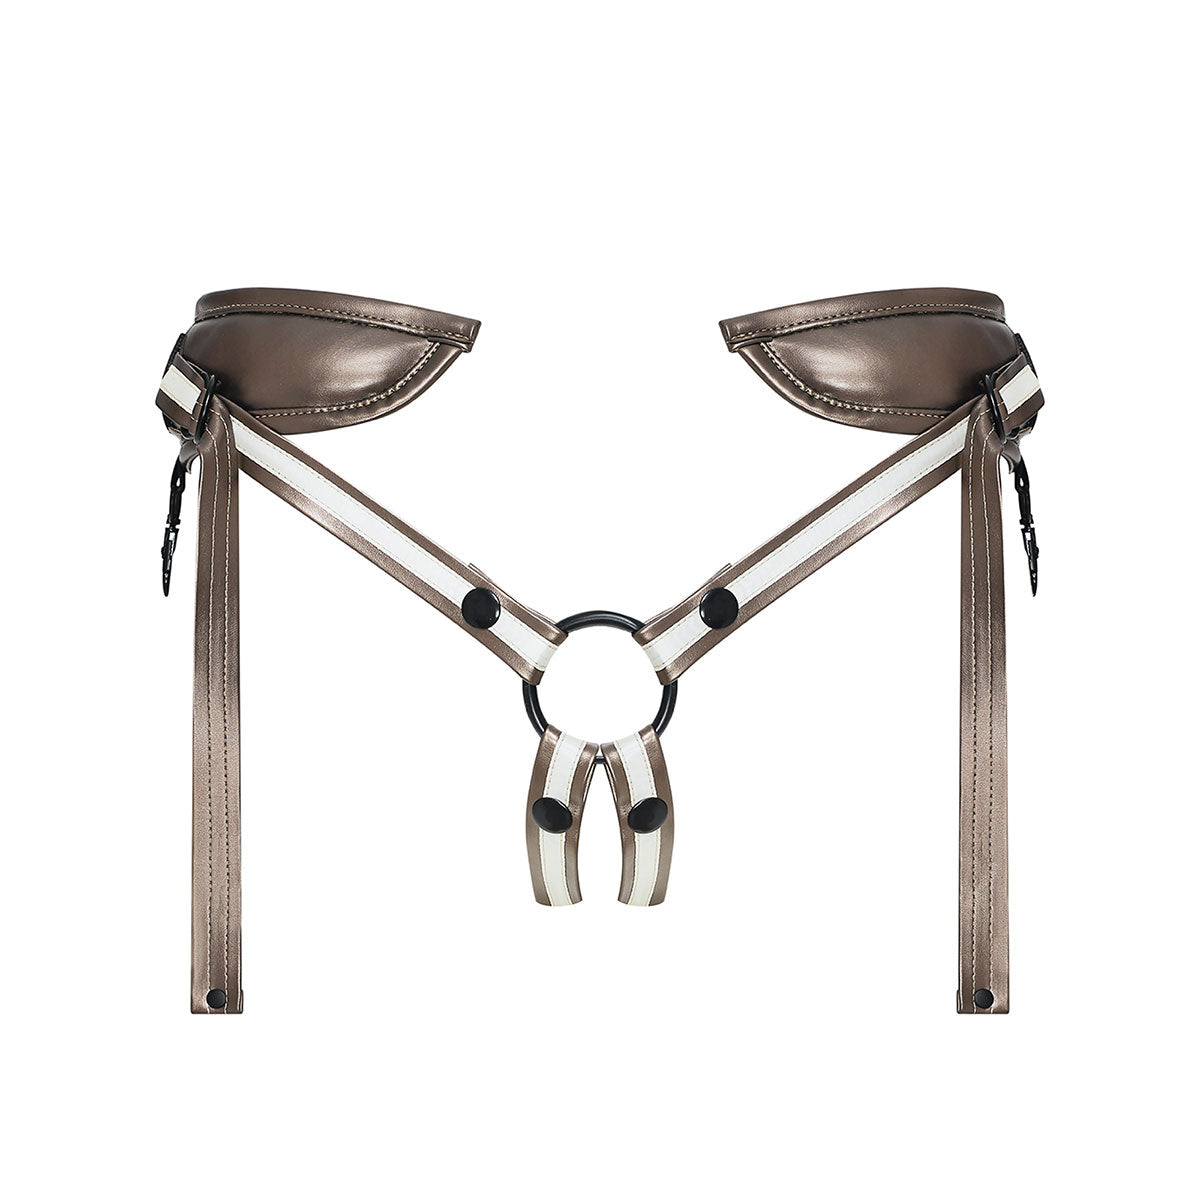 Strap-On-Me Leatherette Harness